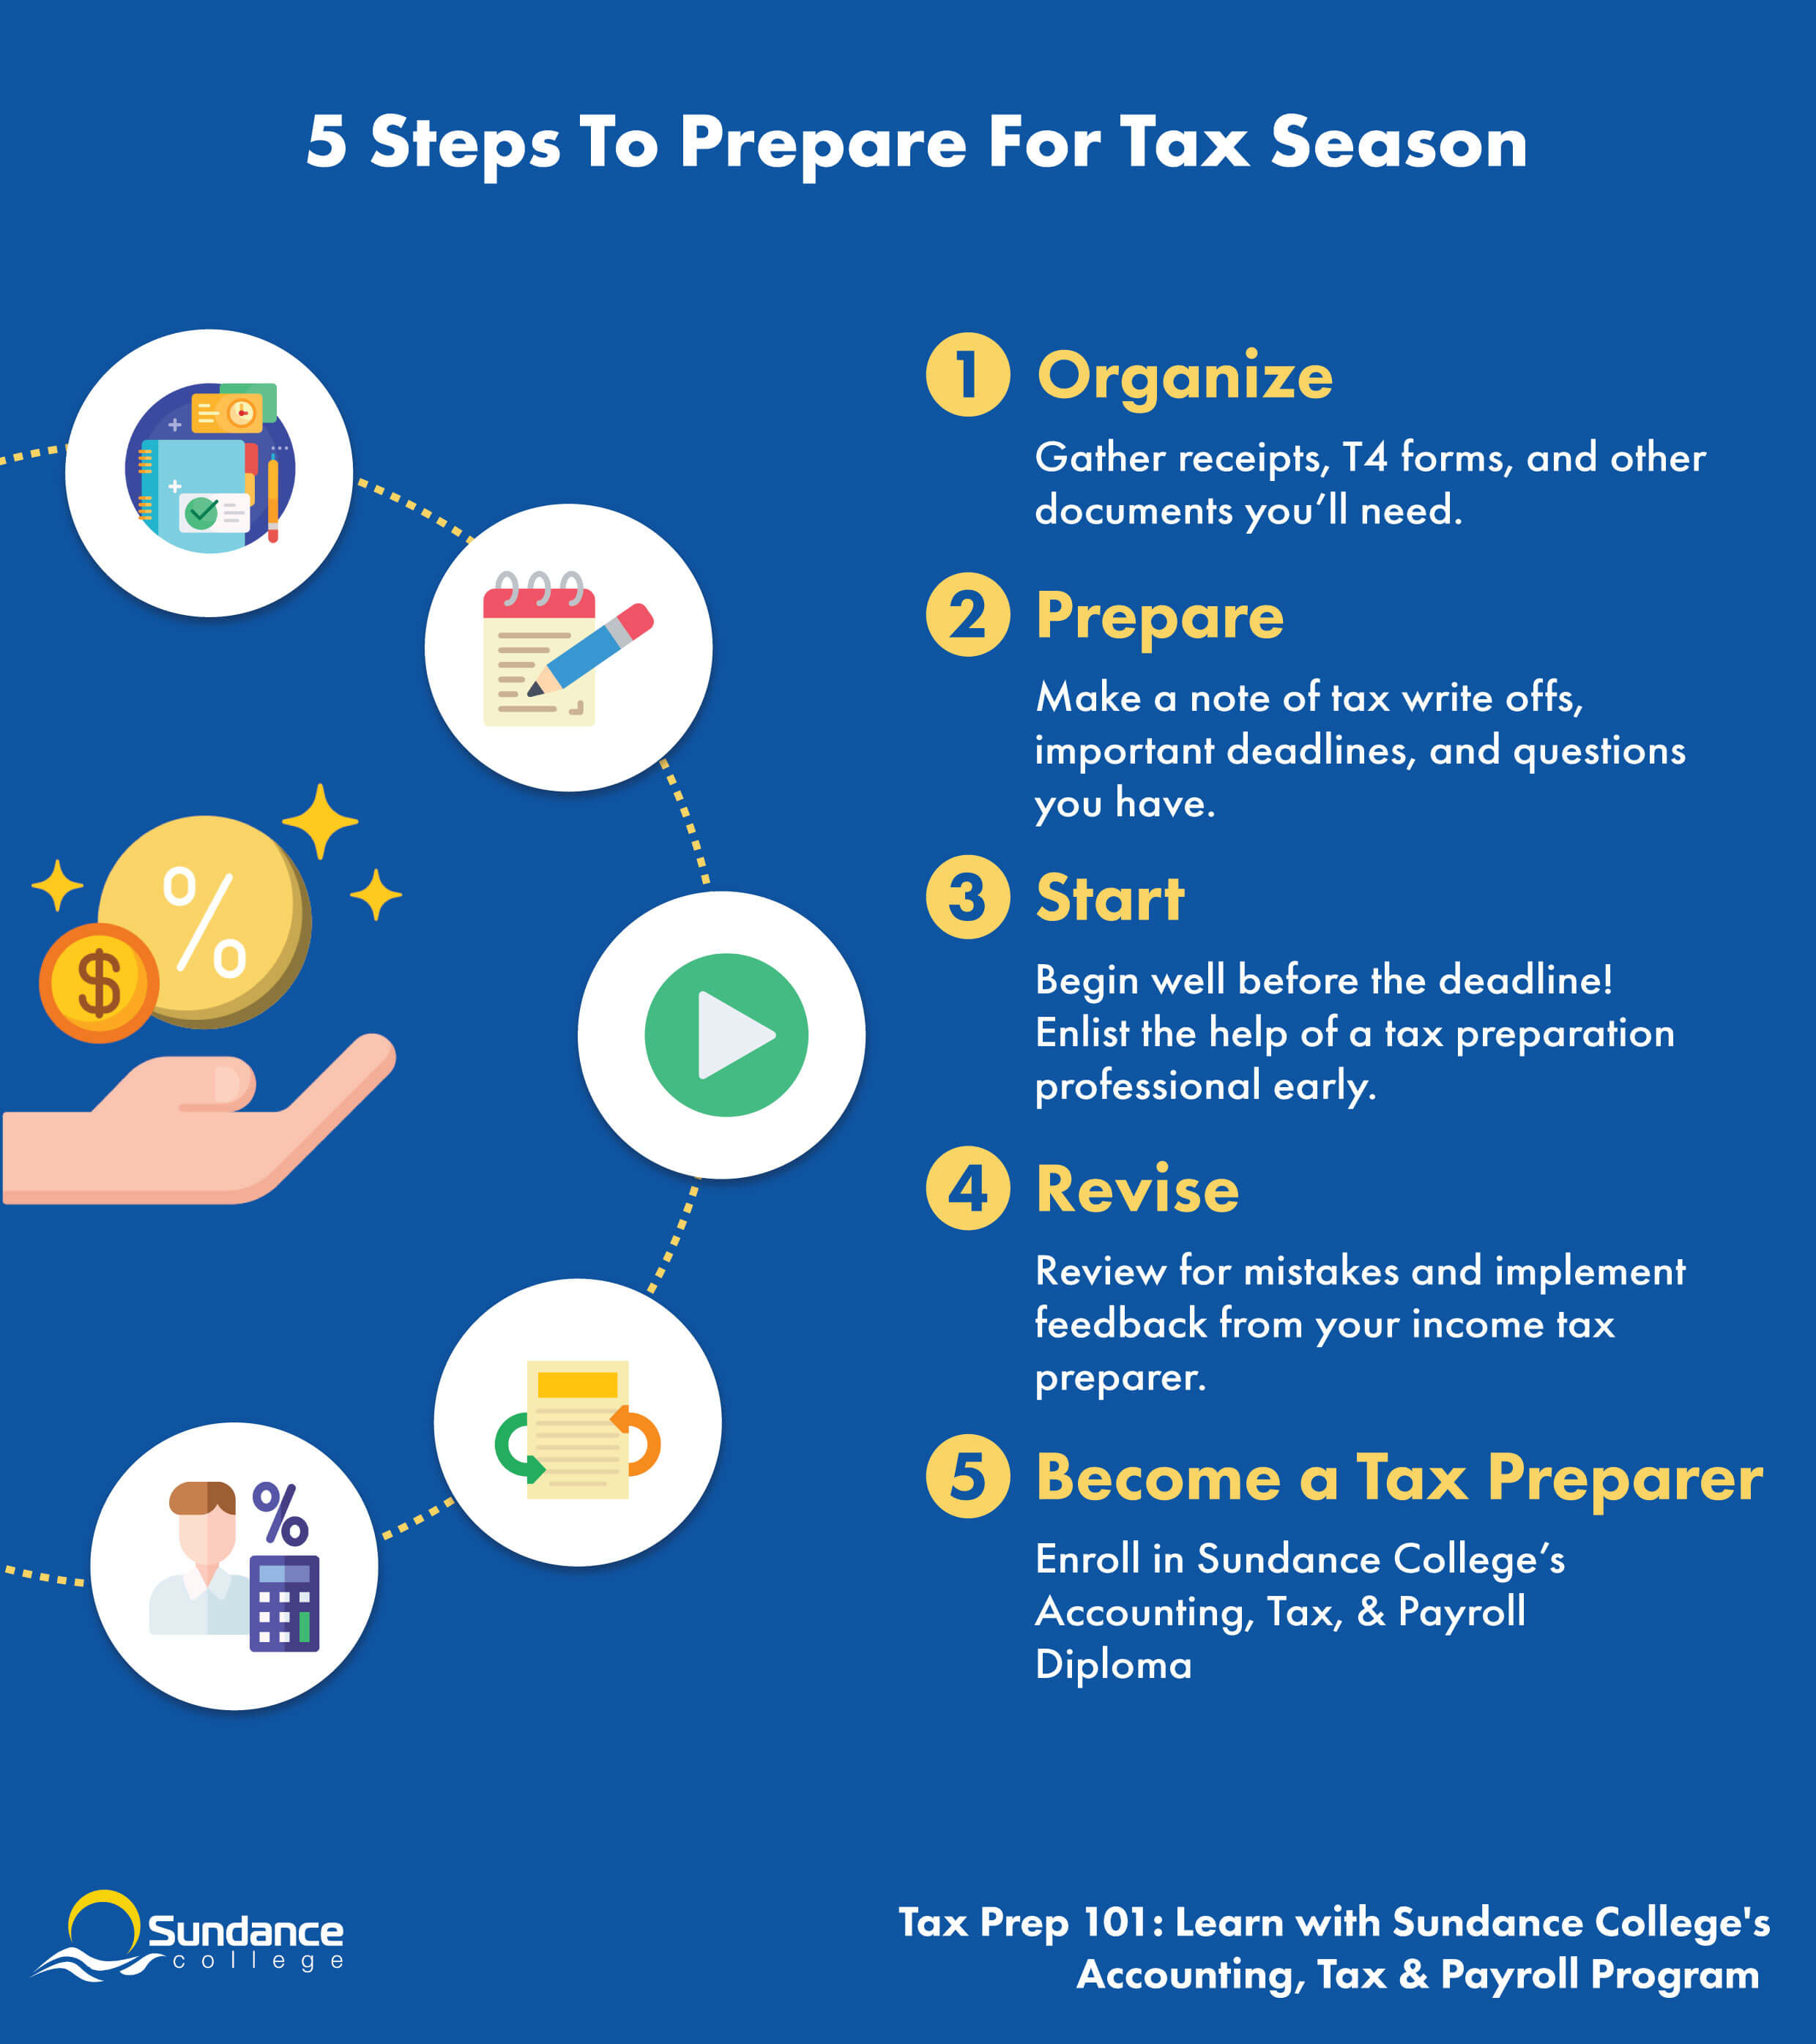 infographic describing the 5 steps you can take to prepare for tax season; especially organizing, preparing, starting early, enlisting the help of a tax preparer, revising to catch mistakes and plan taxes, and finally becoming a tax preparer yourself.